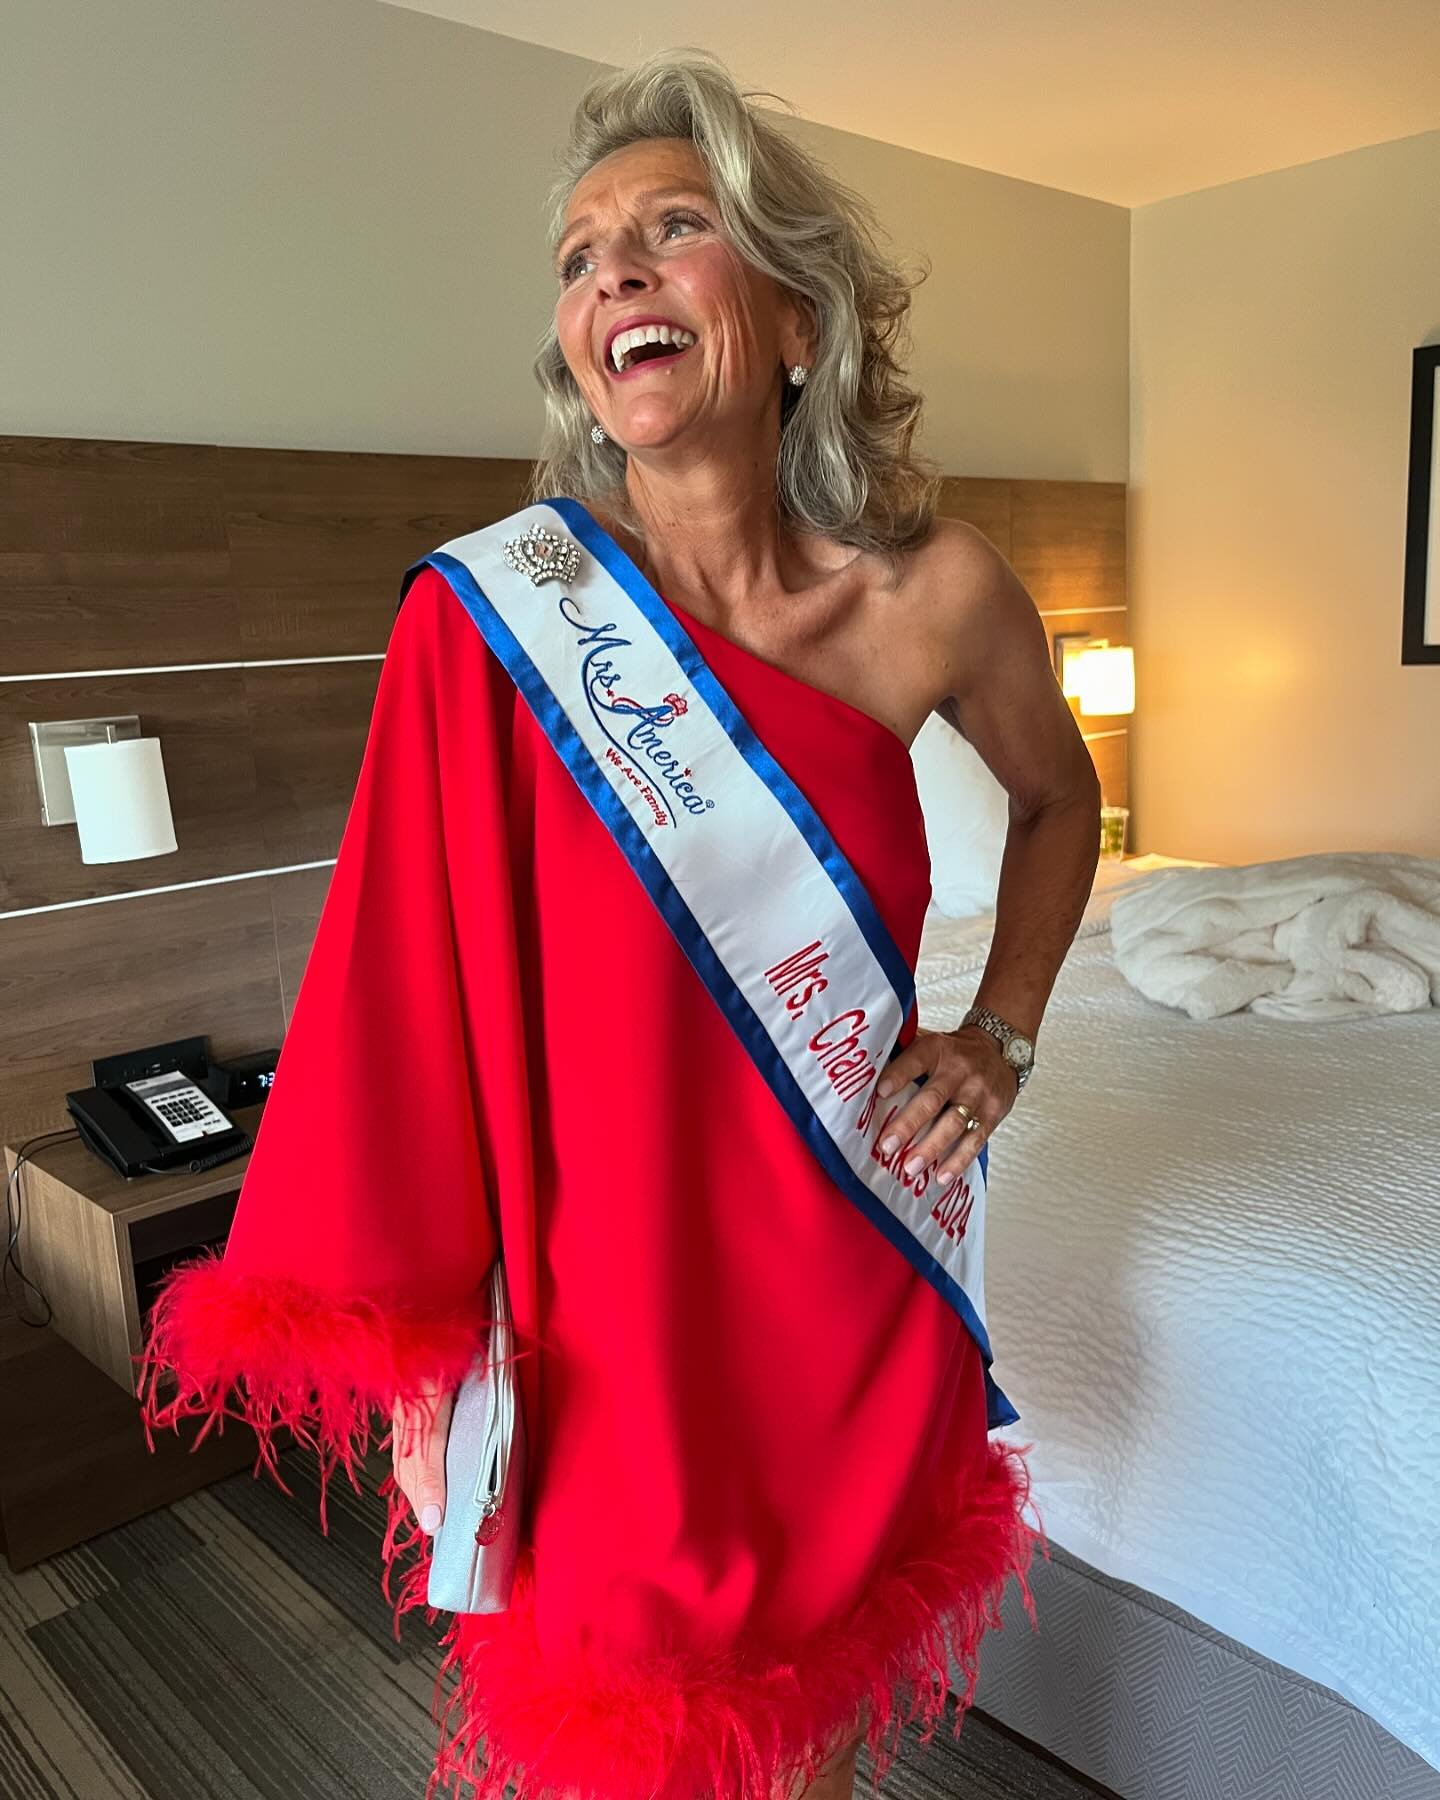 Hello from pageant world! 👑🌎

This message goes out to all of those that have loved on me as I have prepared for this day. 🌸

I am especially mindful of all the women who have touched  my life and my heart as contestants and titleholders. Going th